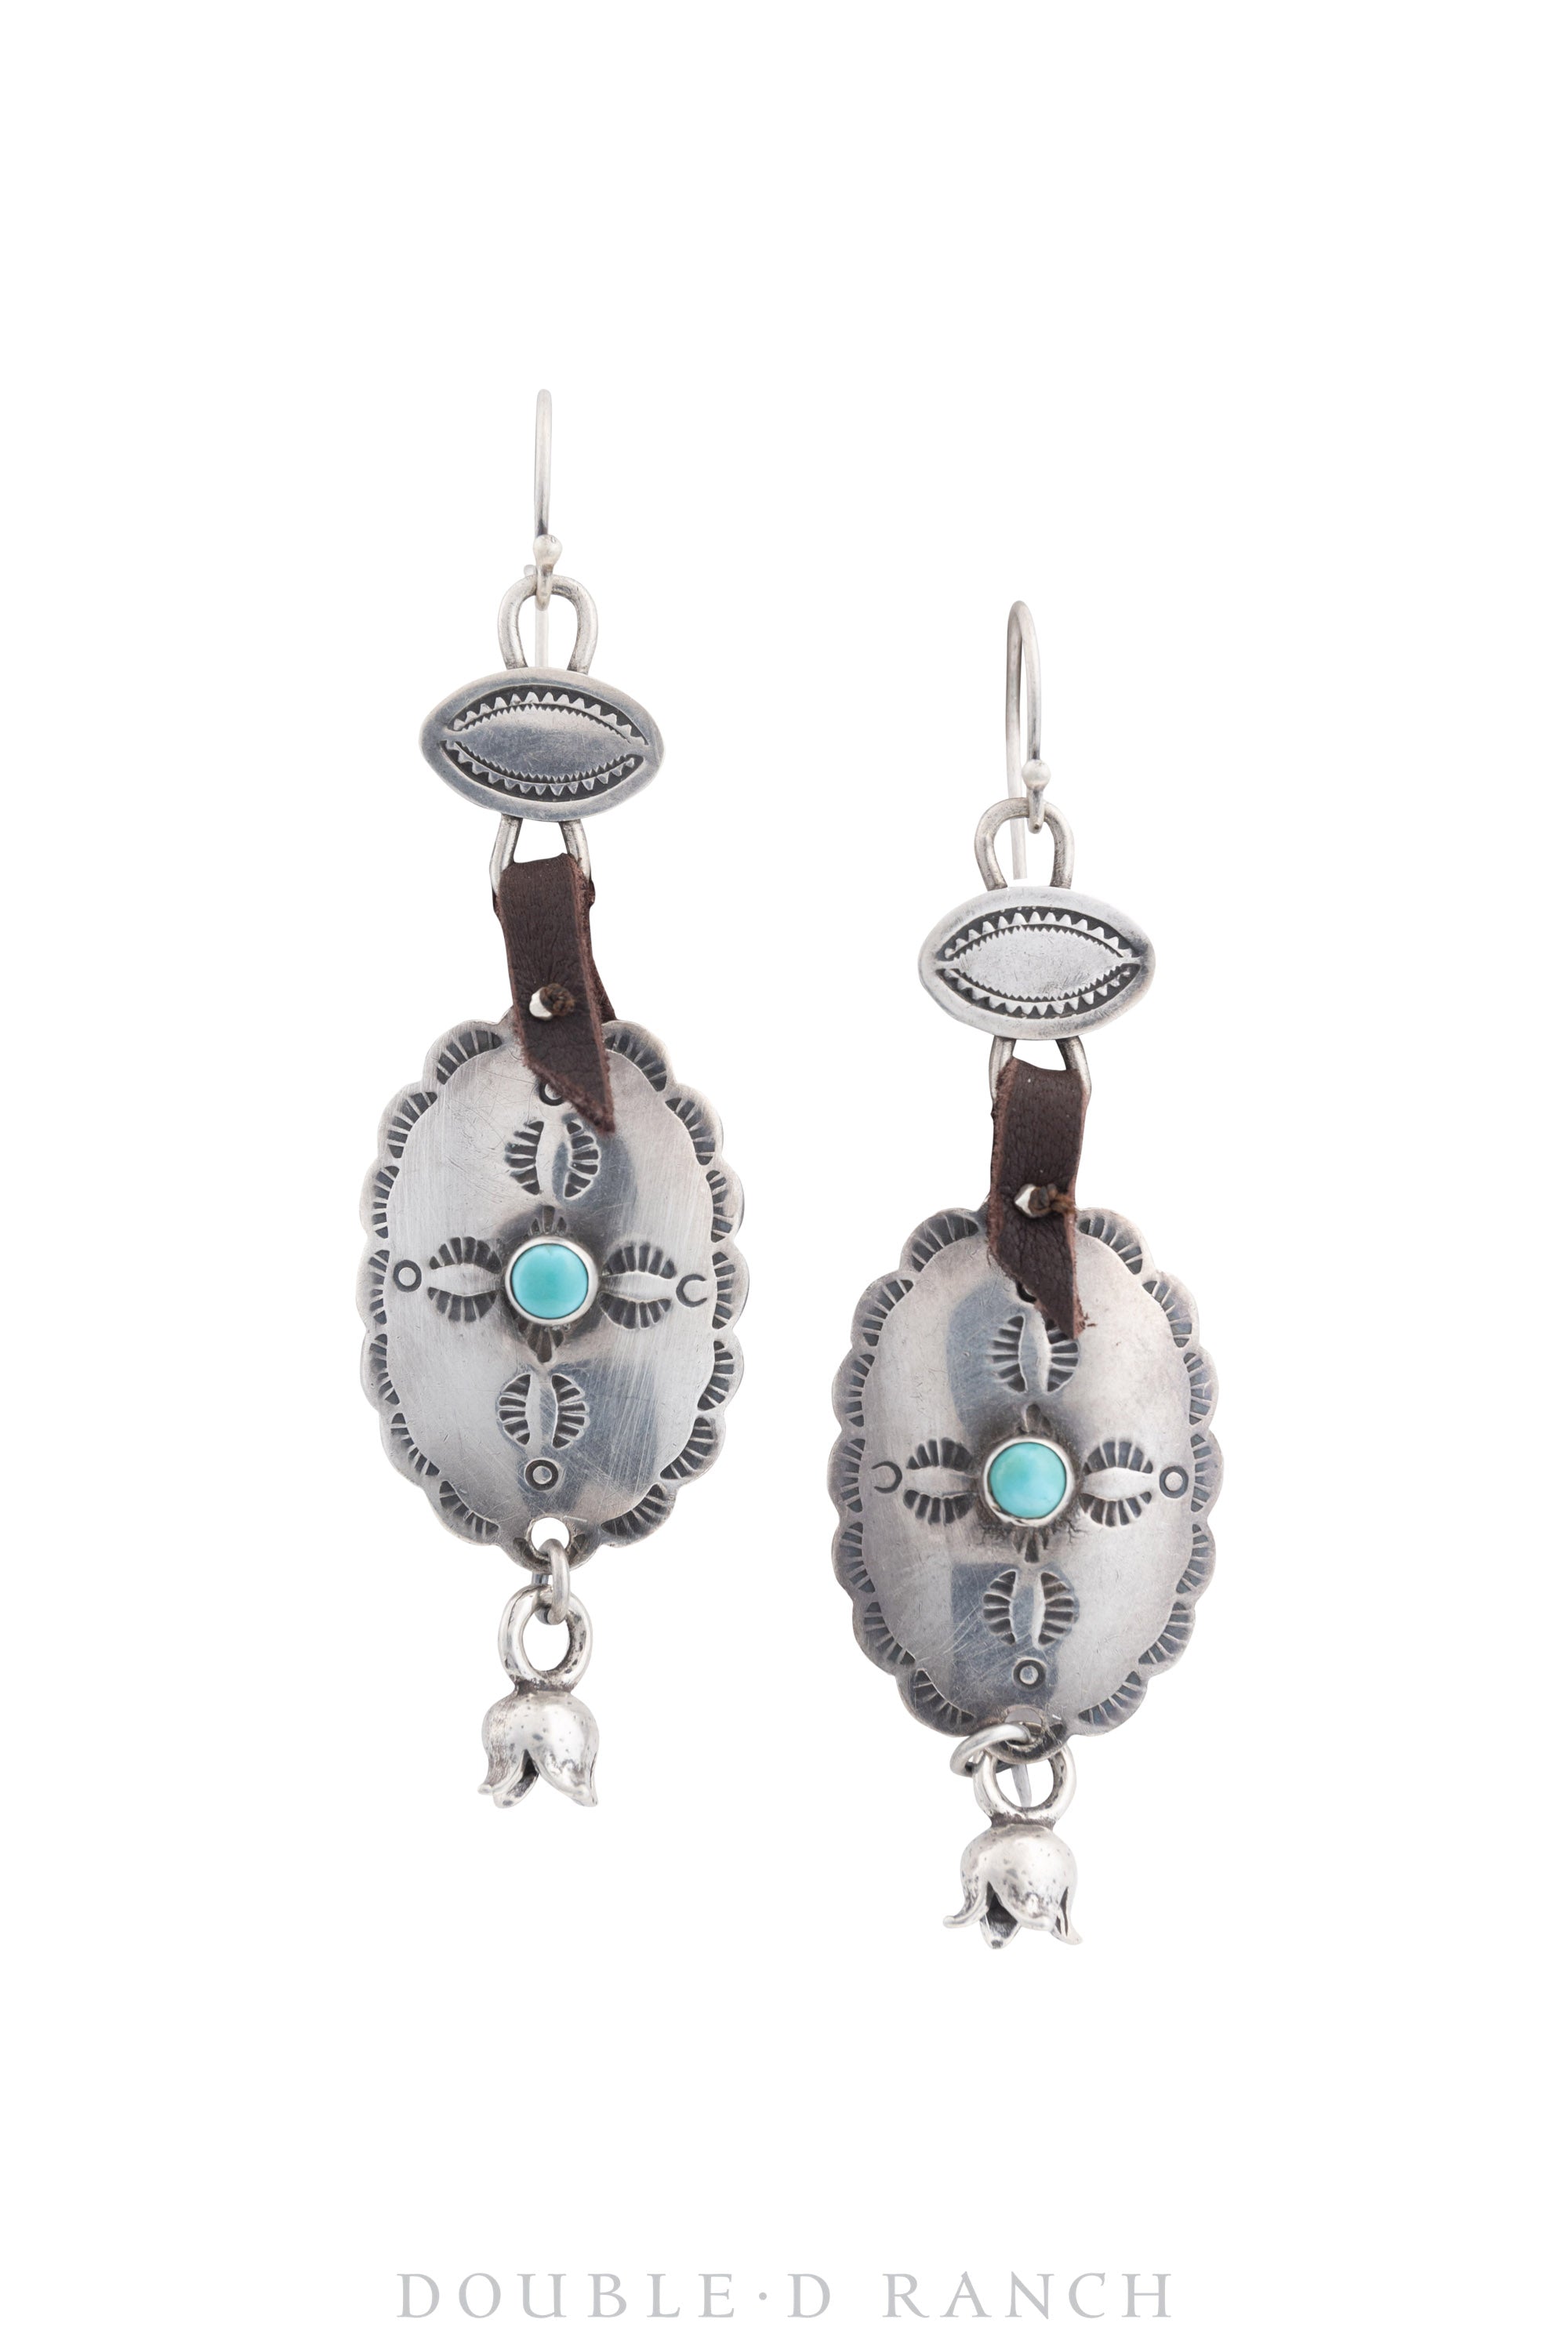 Earrings, Repurposed, Concho, Sterling Silver & Turquoise, 1471